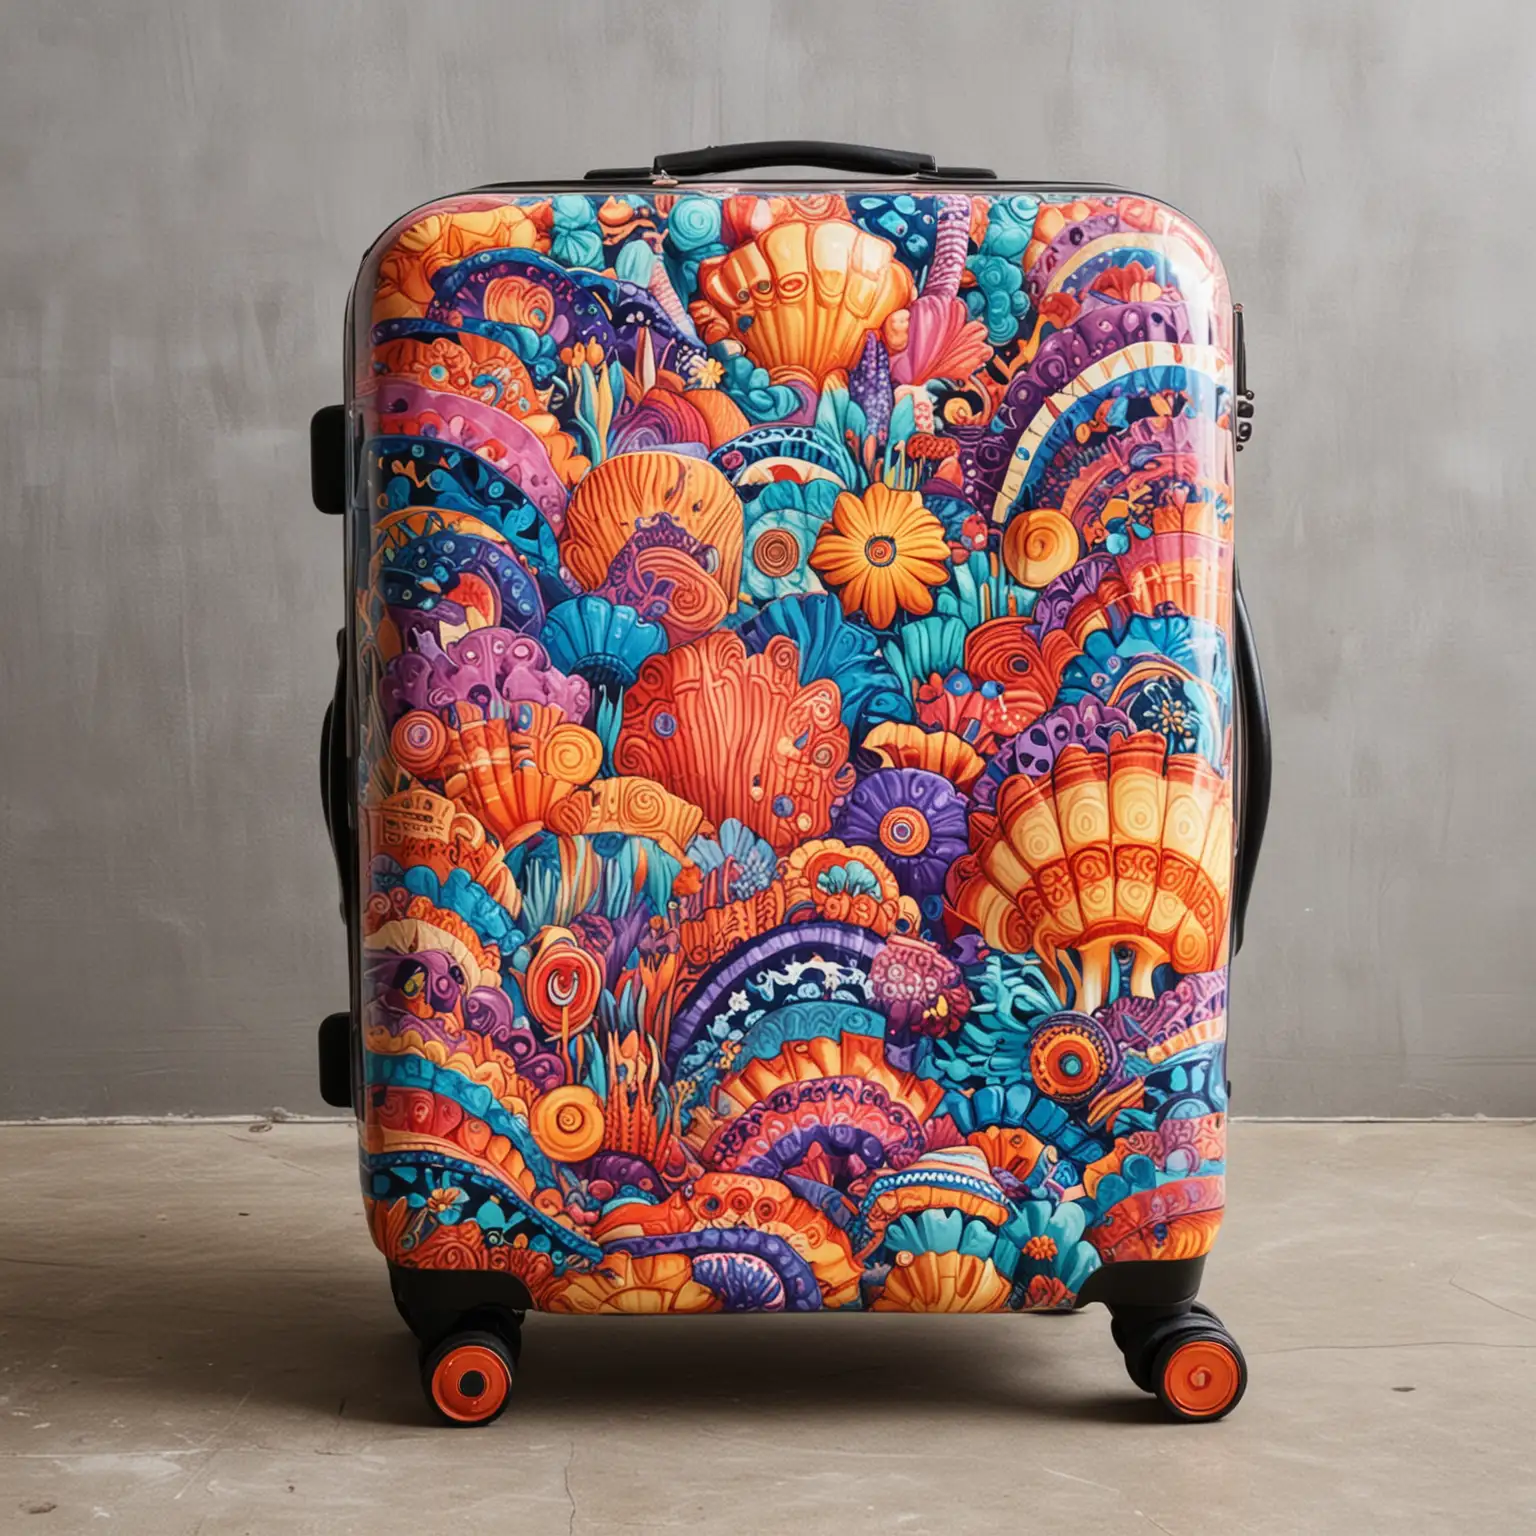 cute trippy hard shell suitcase with extra large roller wheels that are built into the side of the suitcase